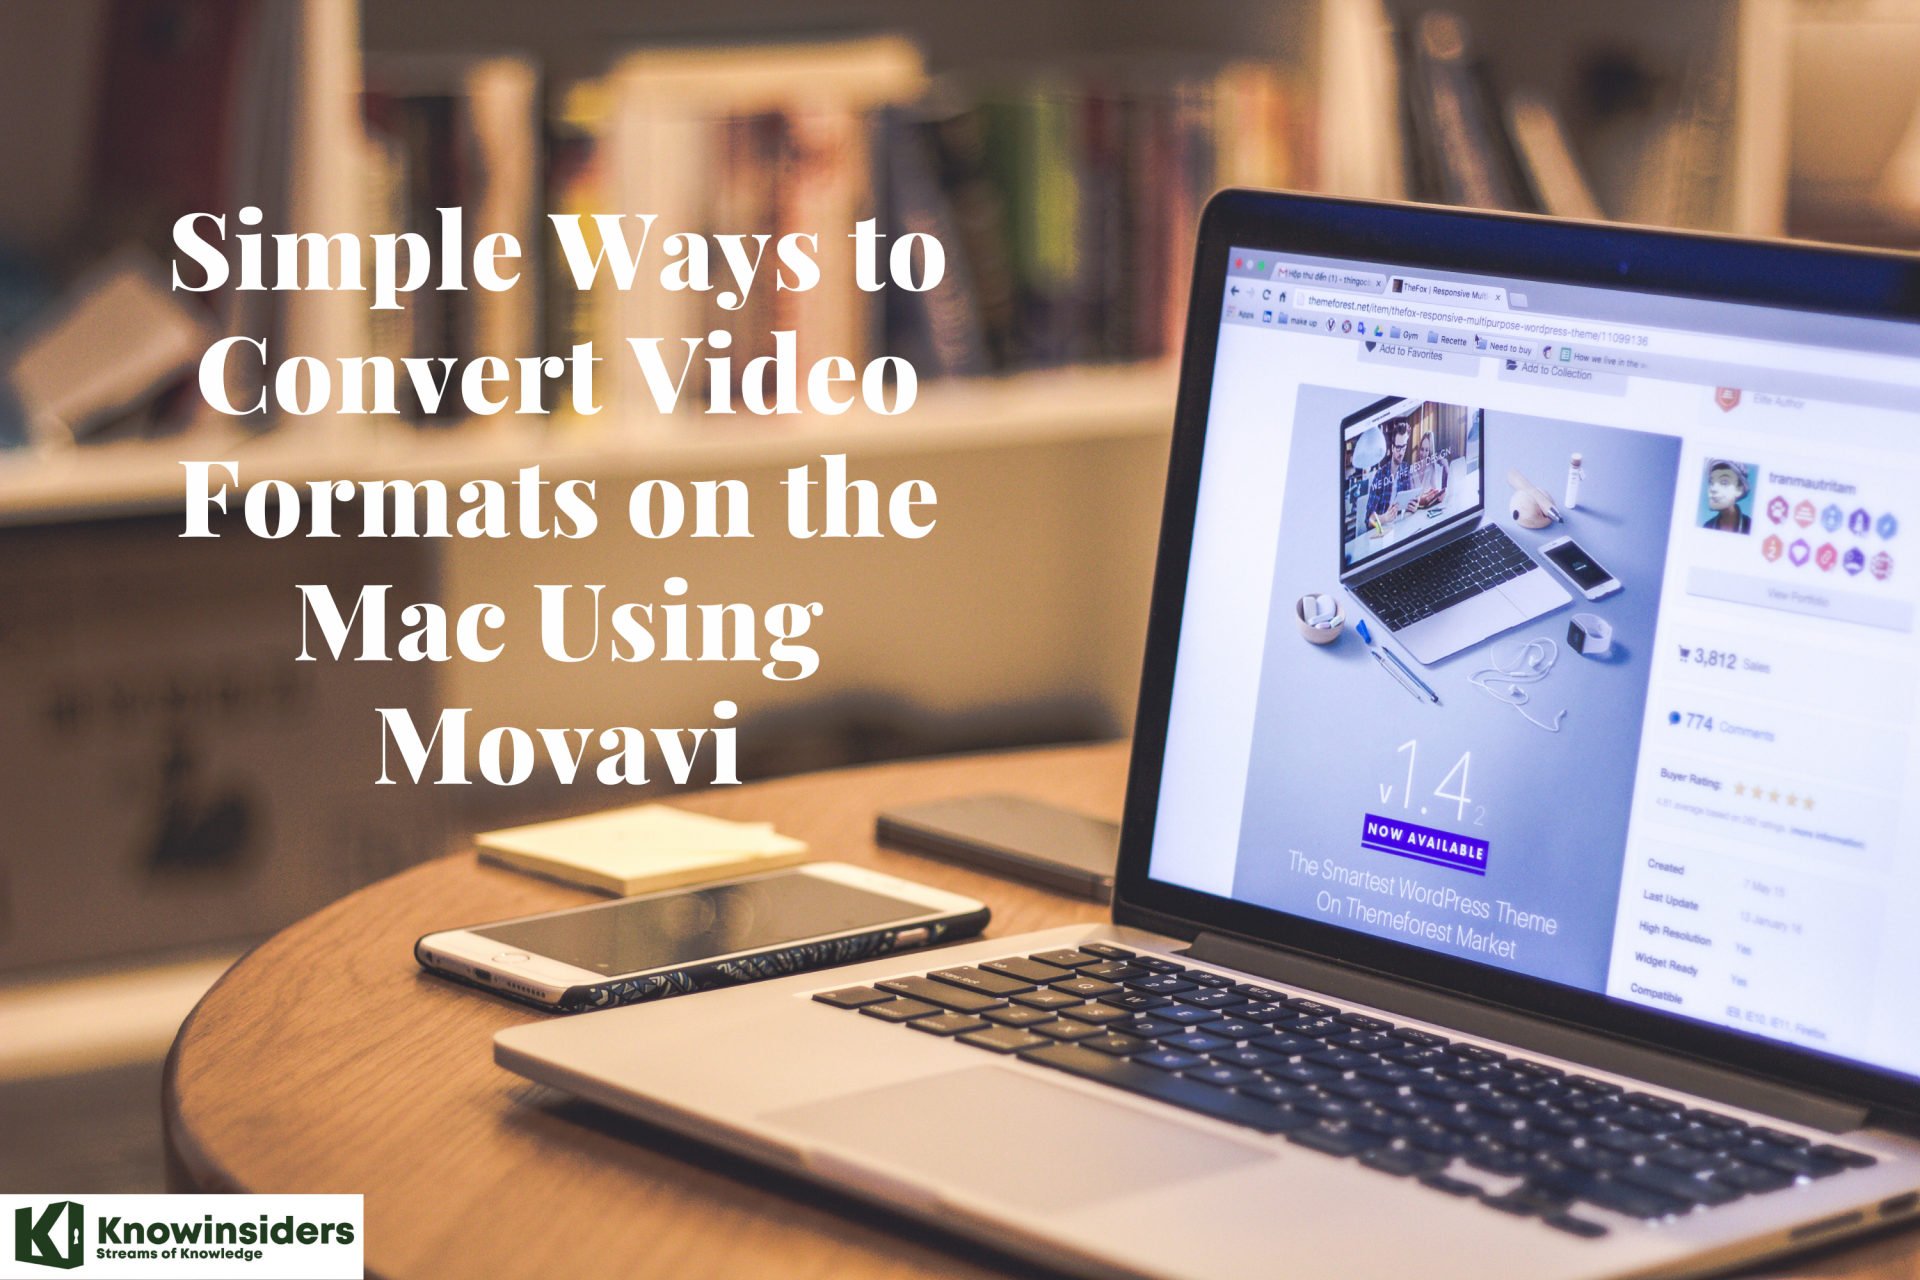 Simple Ways to Convert Video Formats on the Mac Using Movavi - A Complete Guide